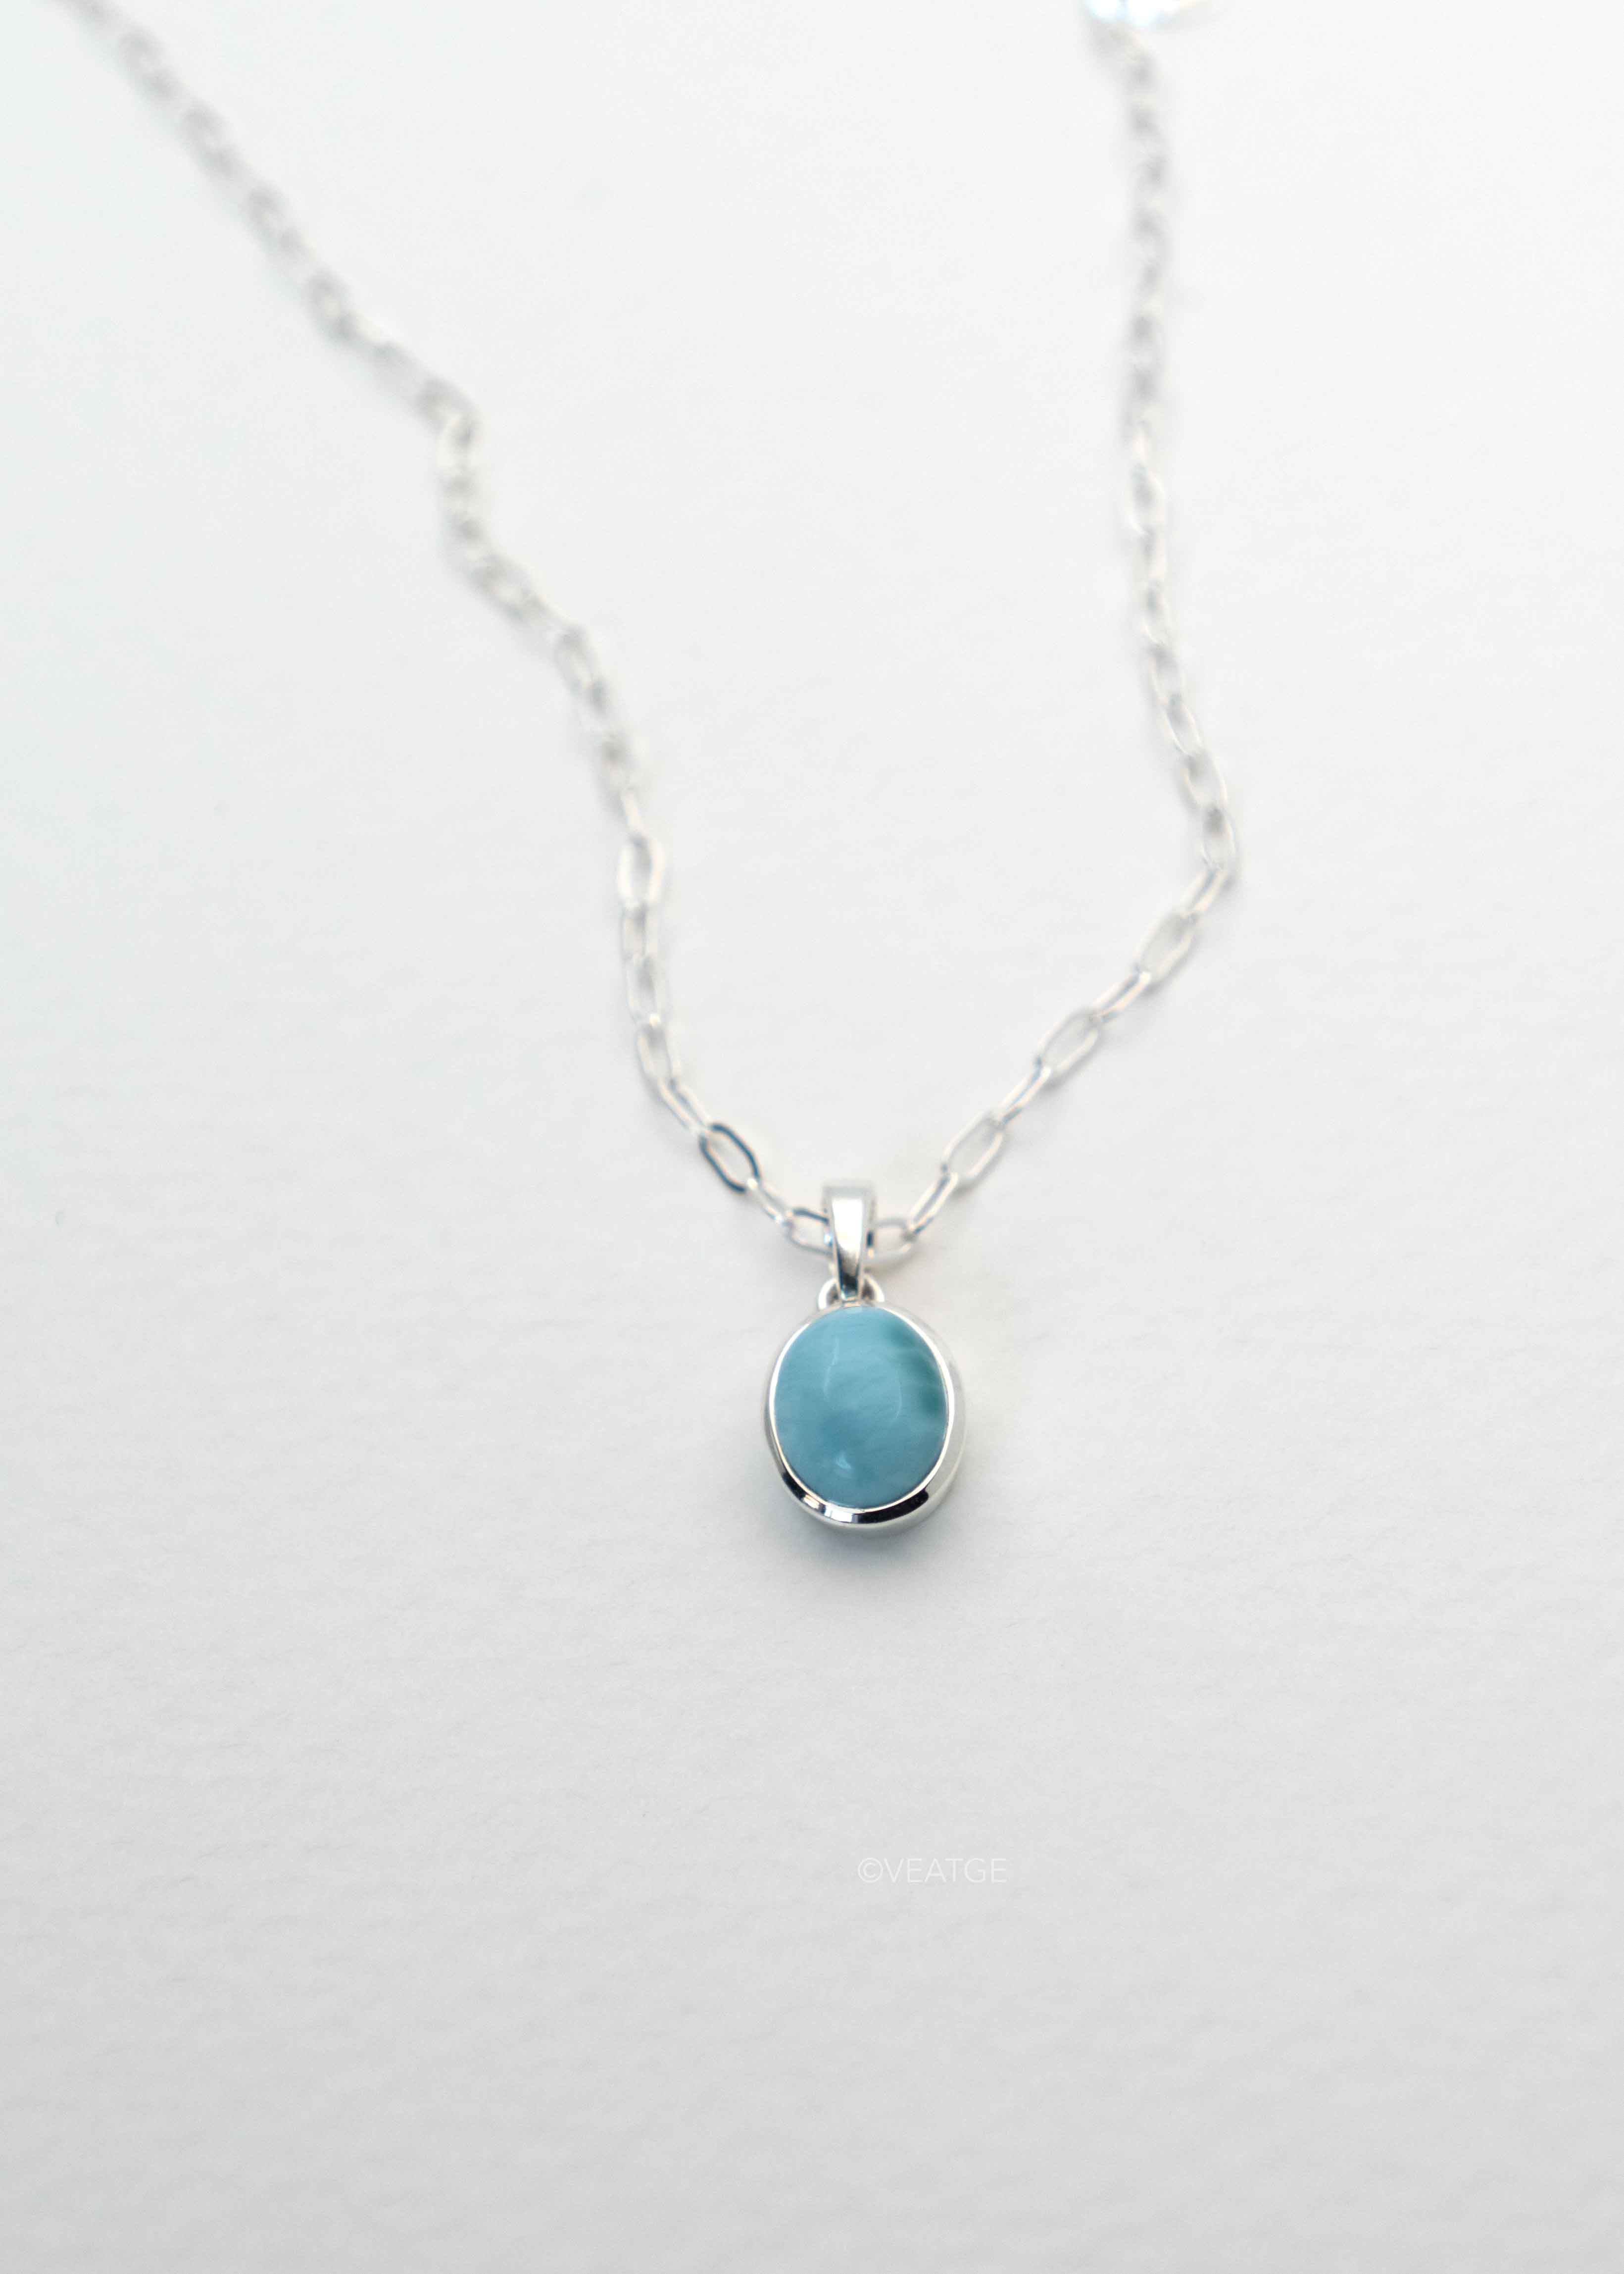 Natural Genuine Larimar Necklace in Sterling Silver Gifts for women